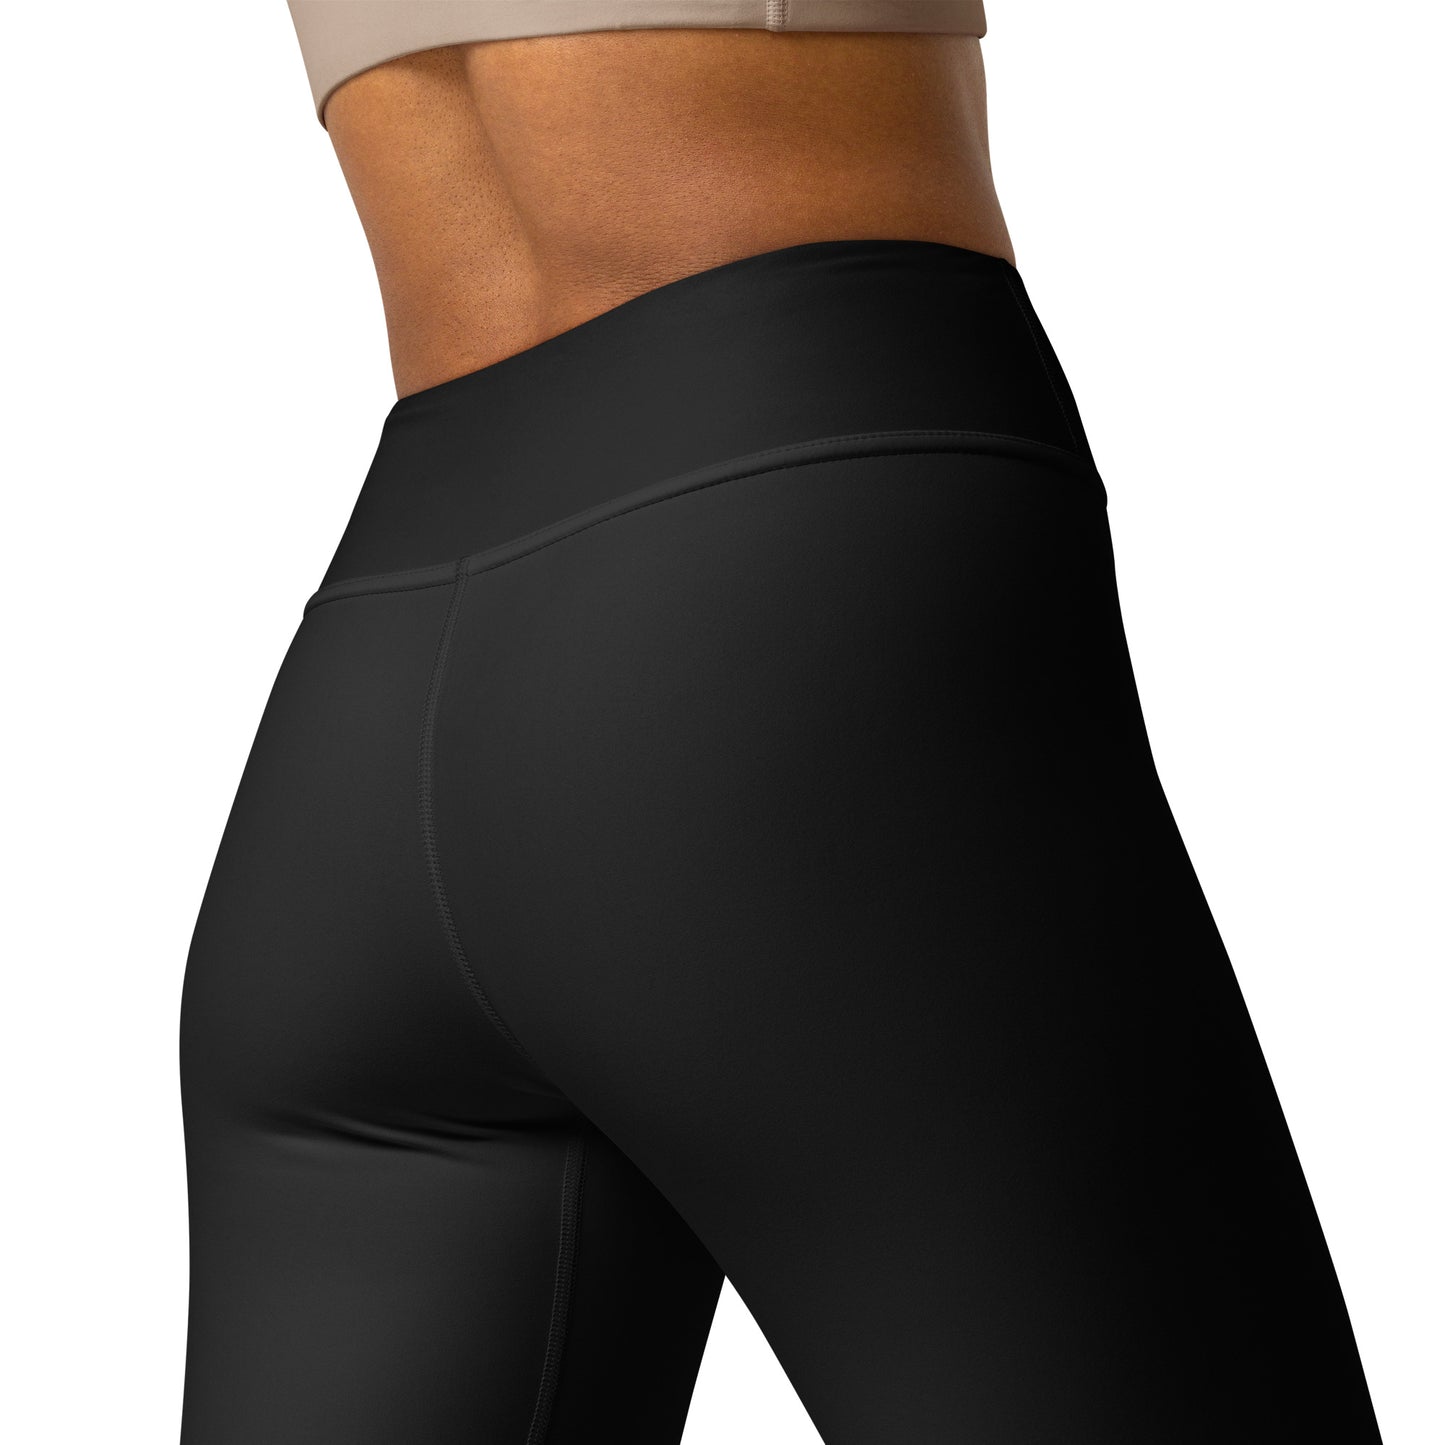 Women's Sports Leggings with Pockets, High Waist Side Lining